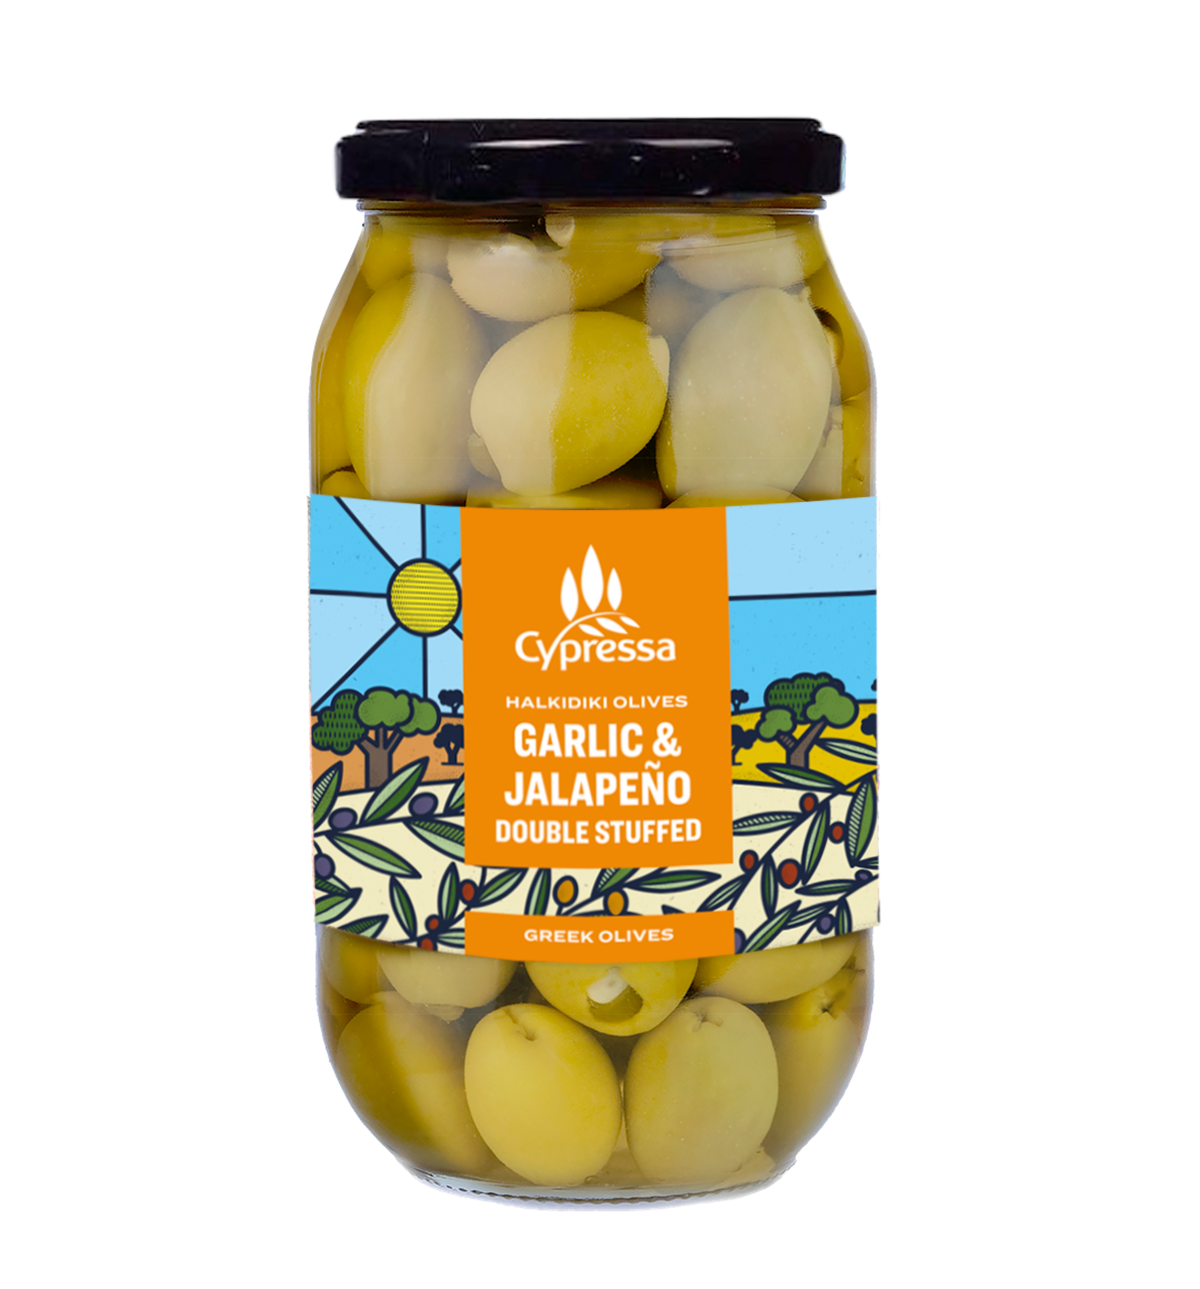 Cypressa launches new Halkidiki Olives into Costco